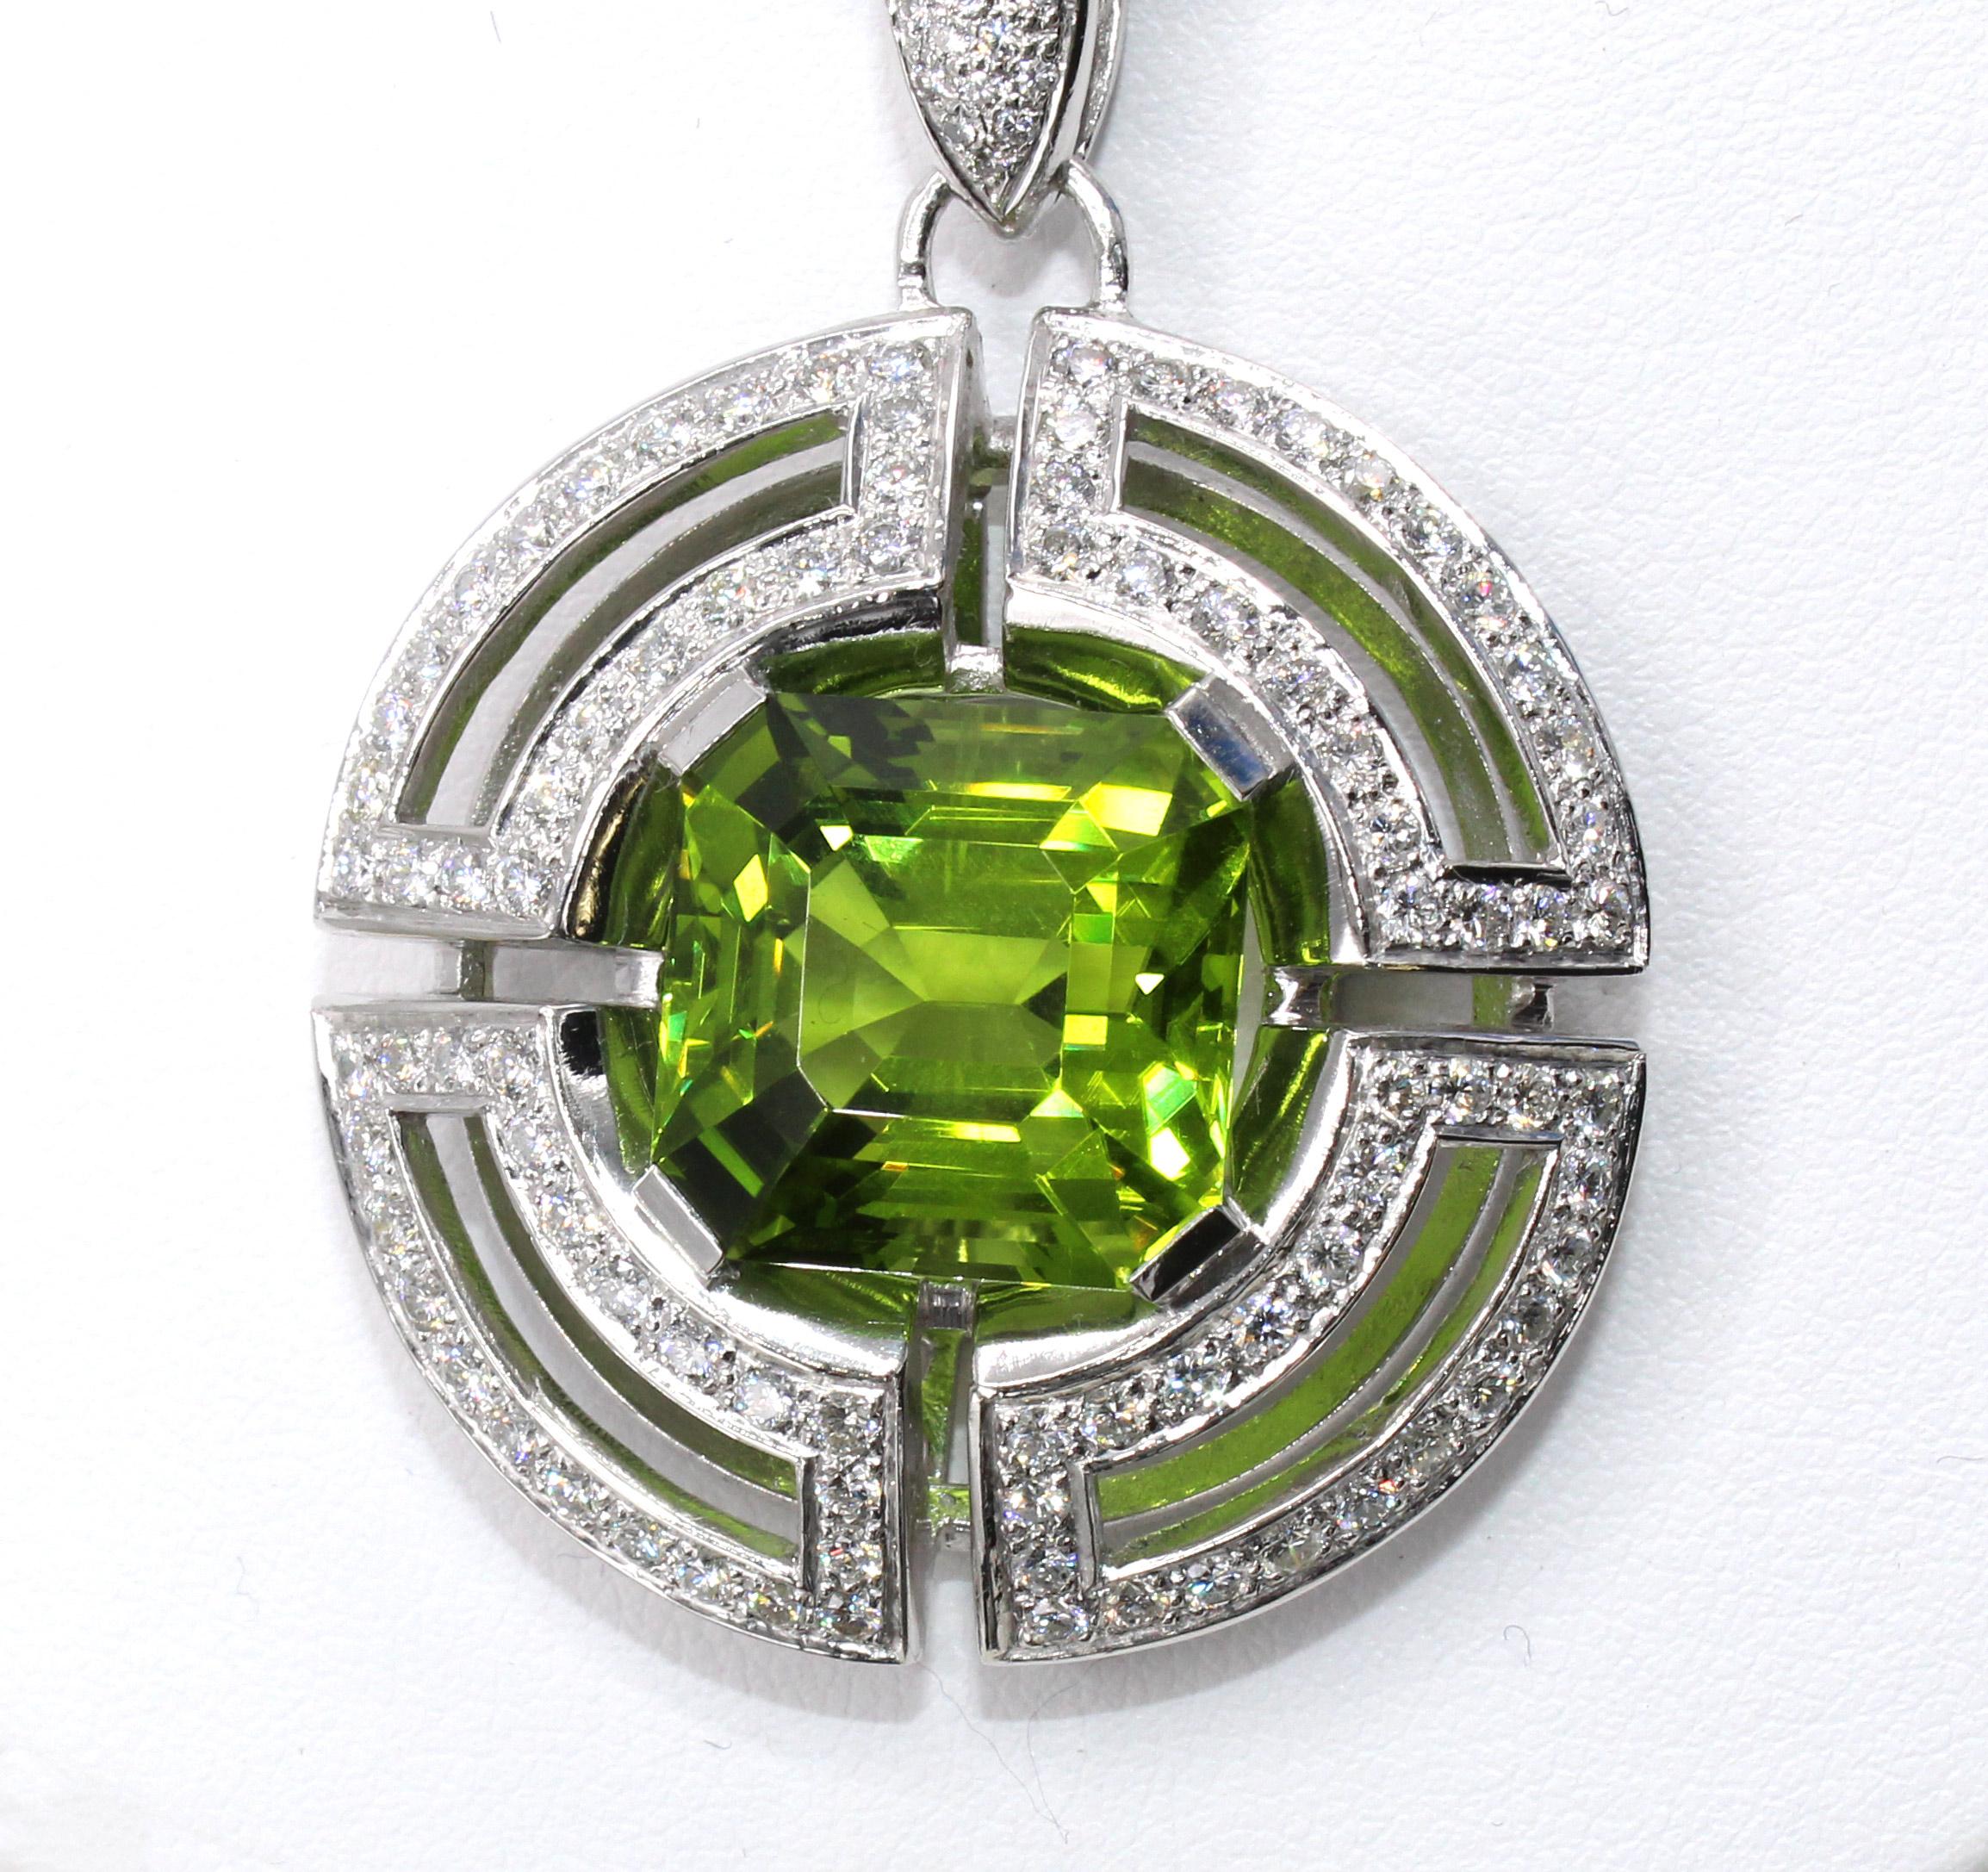 A unique Asscher Cut gem quality Peridot weighing over 20 carats is the center piece of this beautifully designed and masterfully handcrafted pendant necklace by the renown Italian jewelry house Antonini. The Peridot has an amazing saturation of